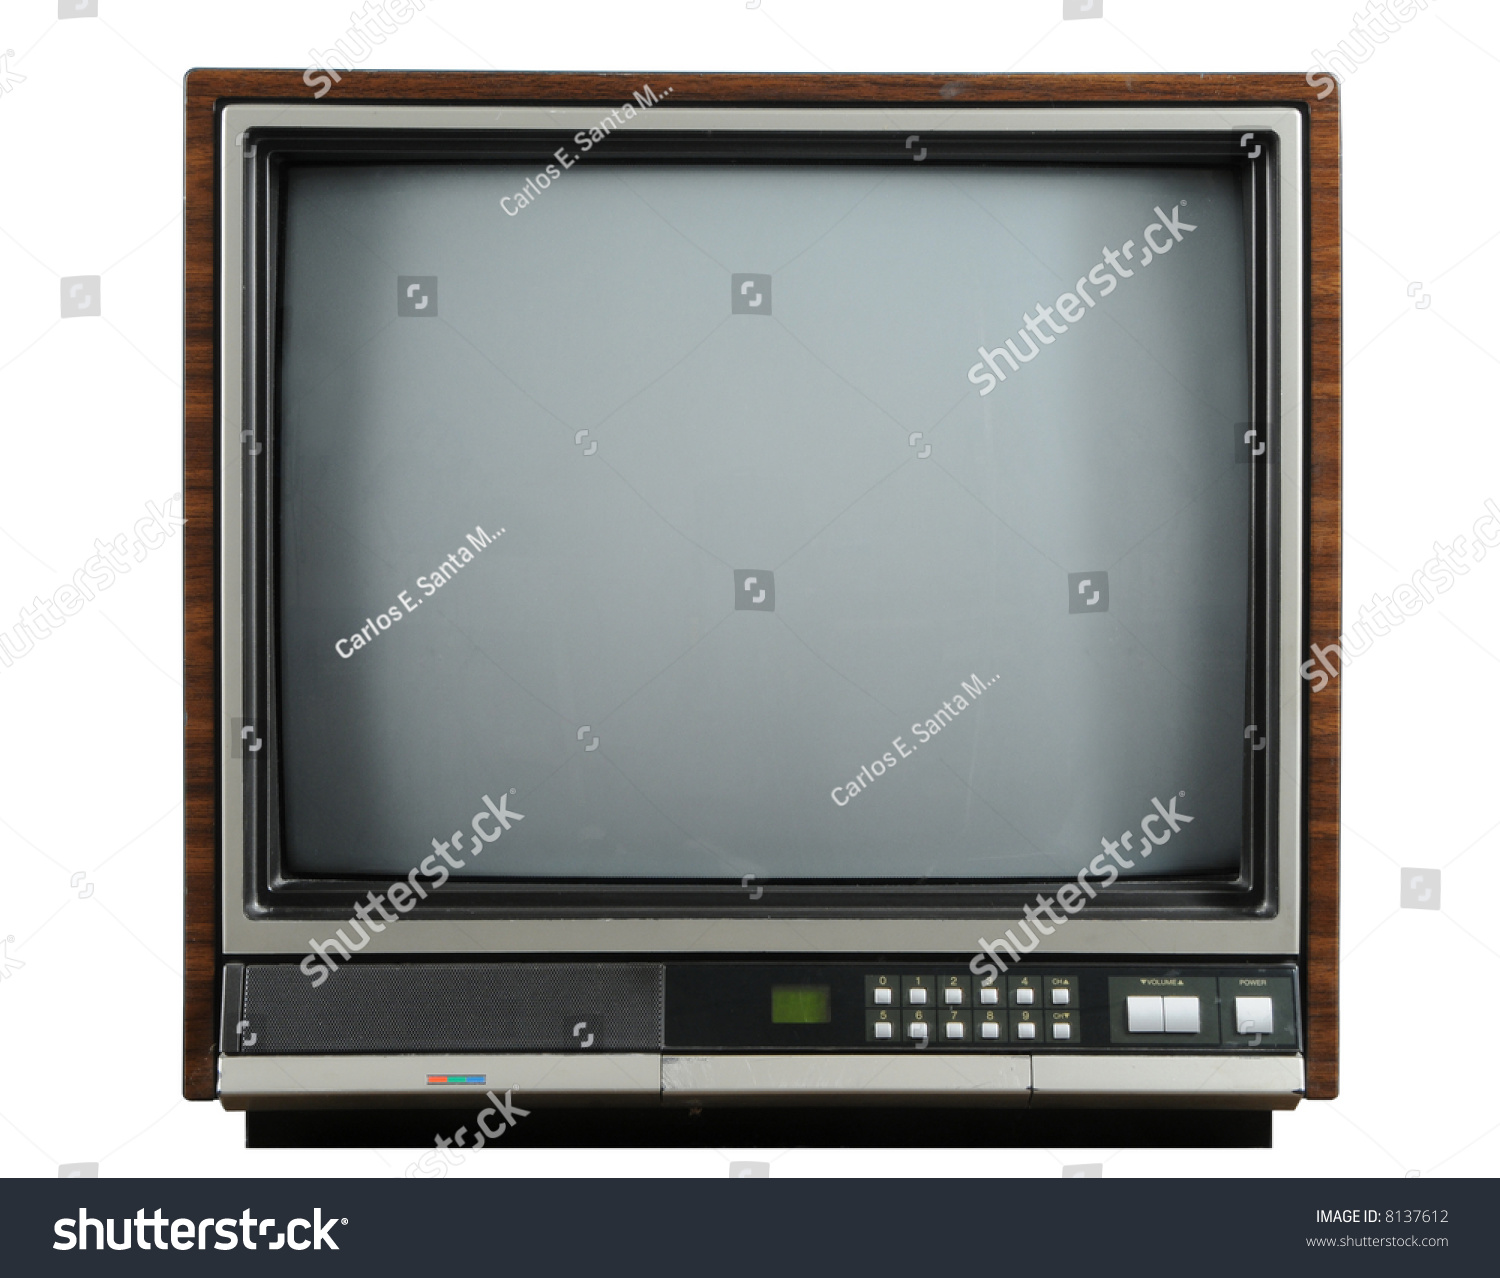 Vintage television isolated on a white background #8137612